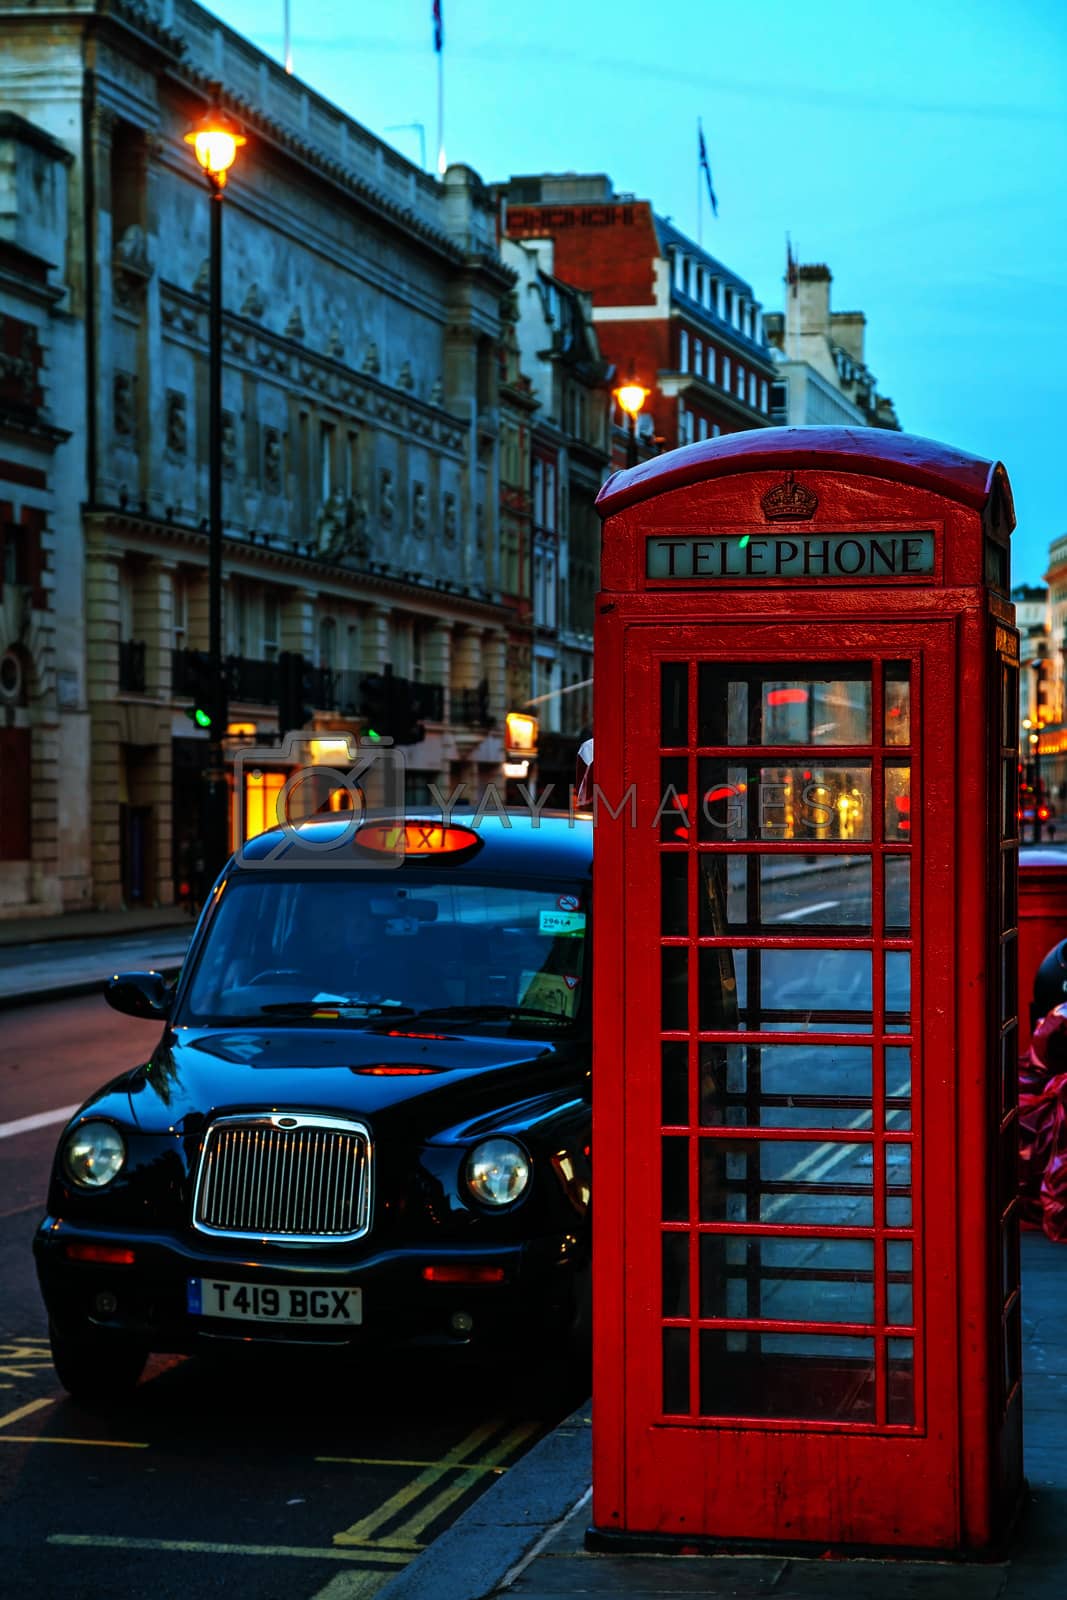 Royalty free image of Famous red telephone booth and taxi cab in London by AndreyKr